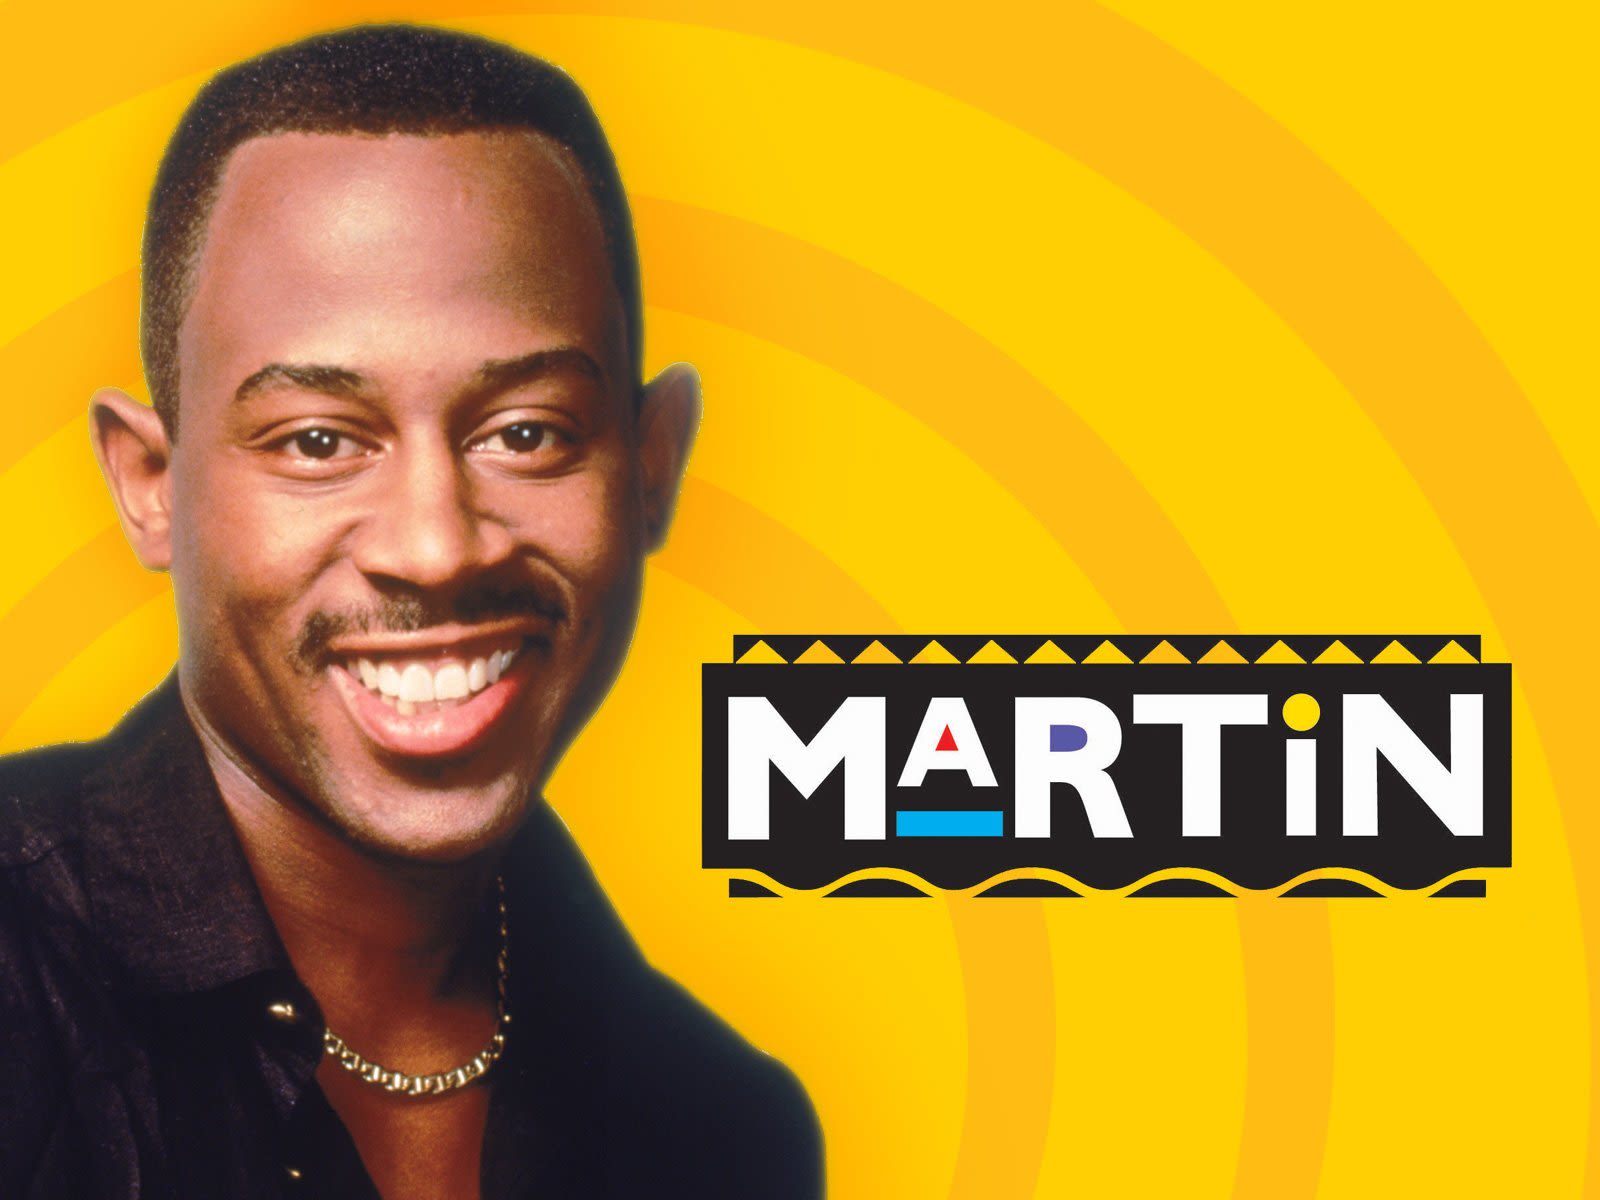 The Source |Martin Lawrence Developing Dramatic ‘Martin’ Prequel Series